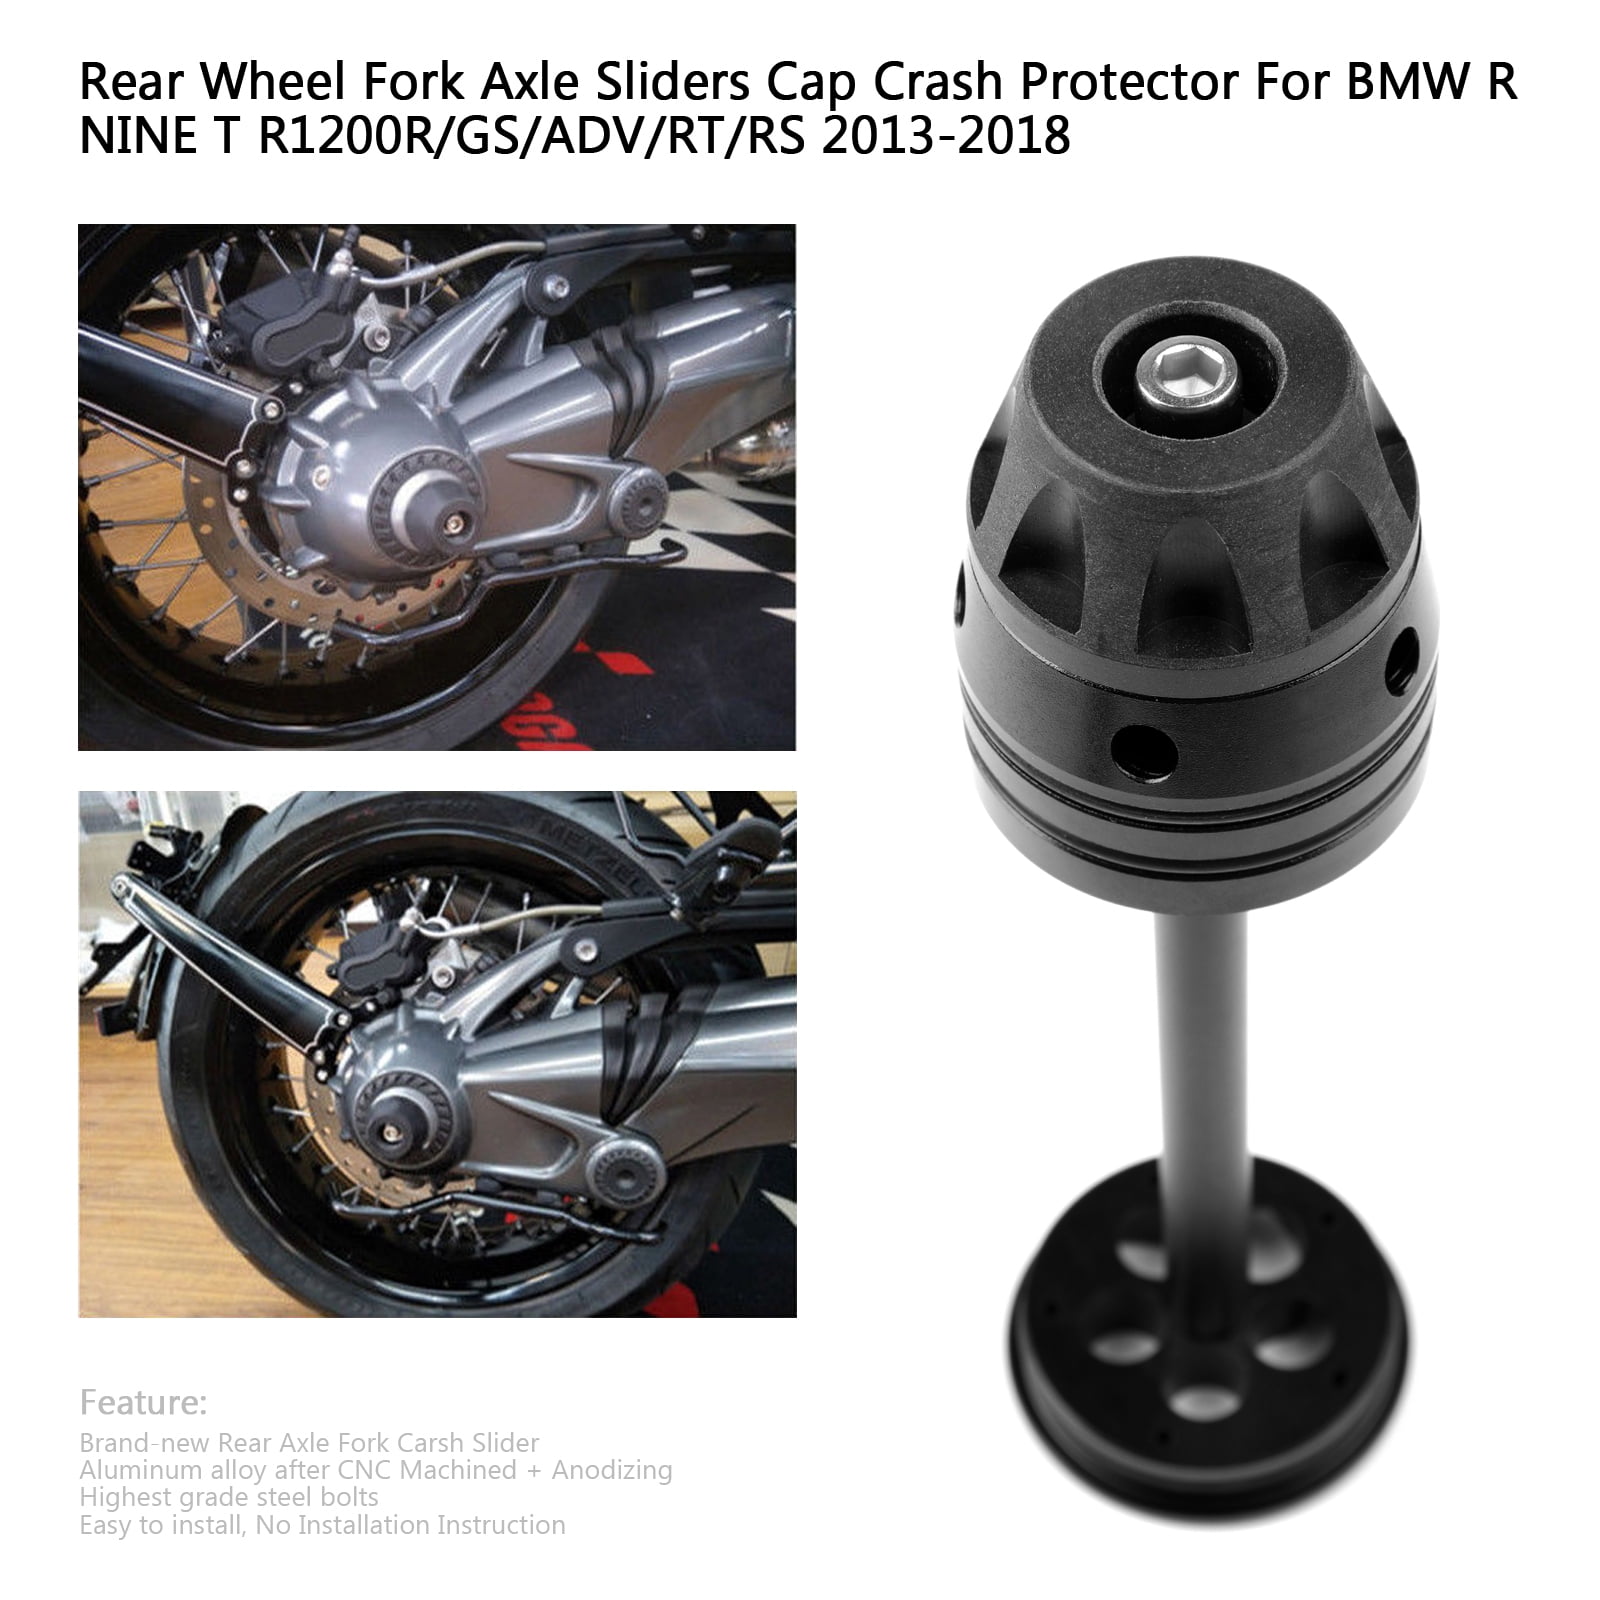 Rear Wheel Spindle Crash Protector For R1200GS LC Adventure R1200R RS 2014-2018 